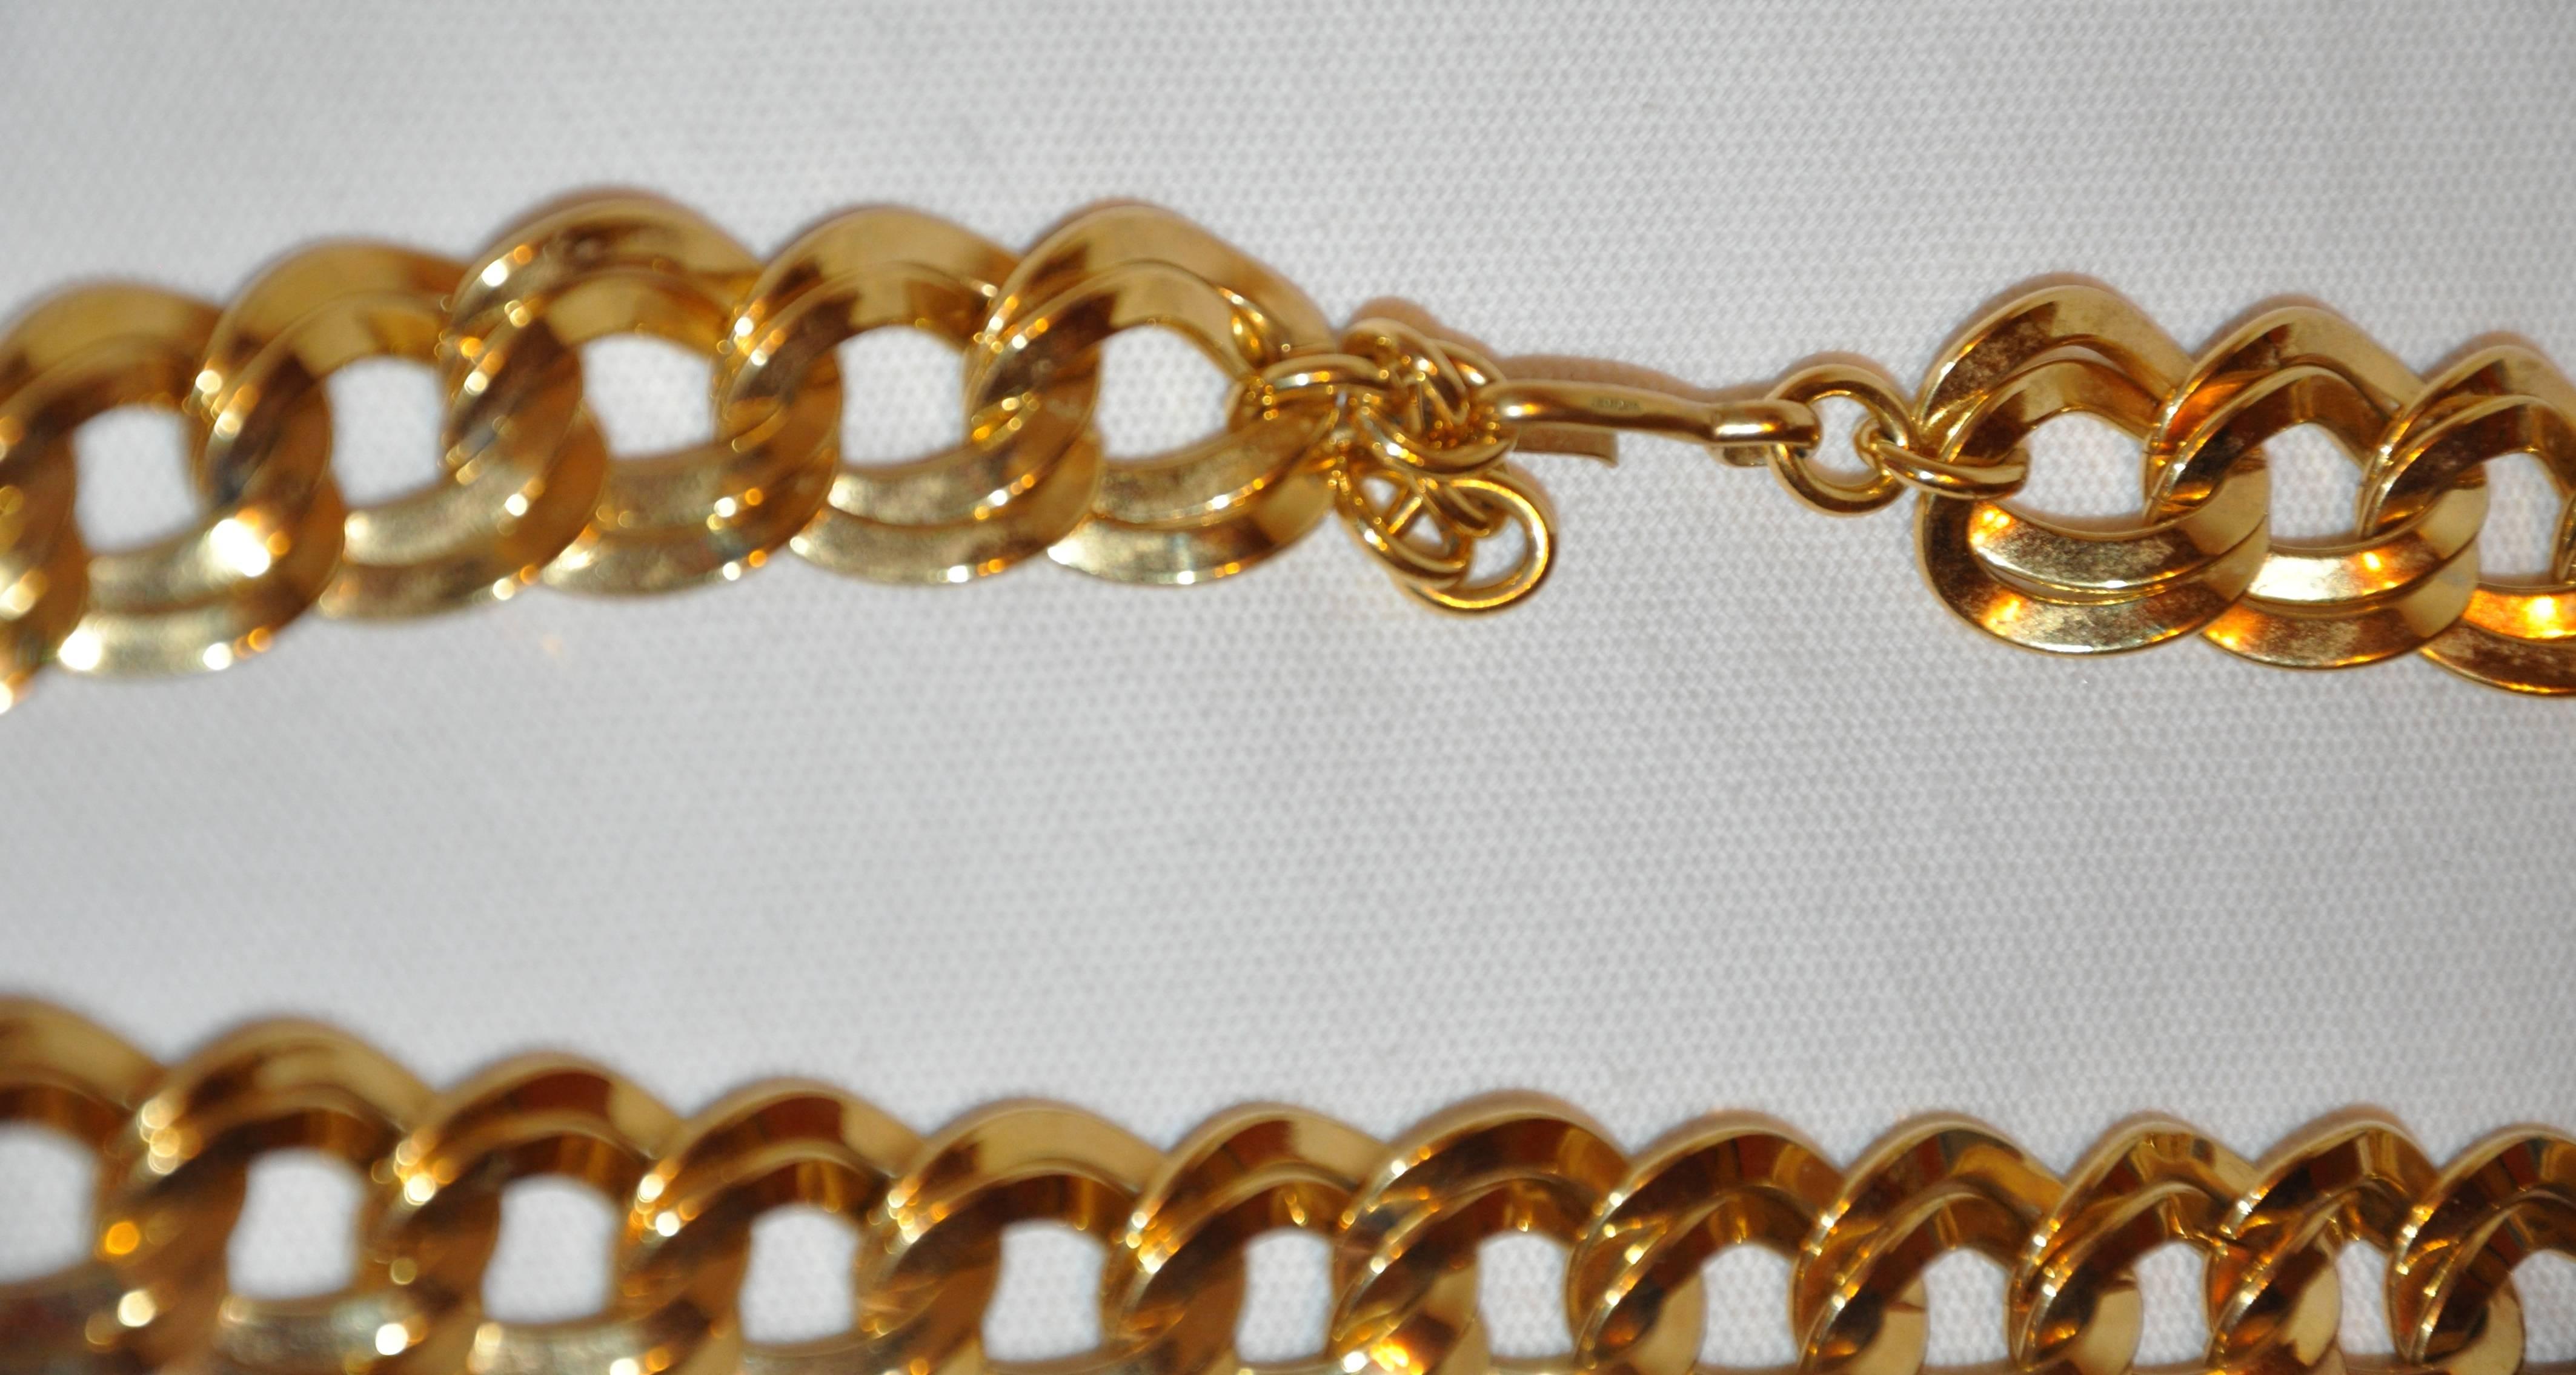        Monet's wonderfully thick polished gold vermeil hardware "Double Loop" chain necklace measures 6/8" in width and 19"-20 1/2" in length, made in USA.